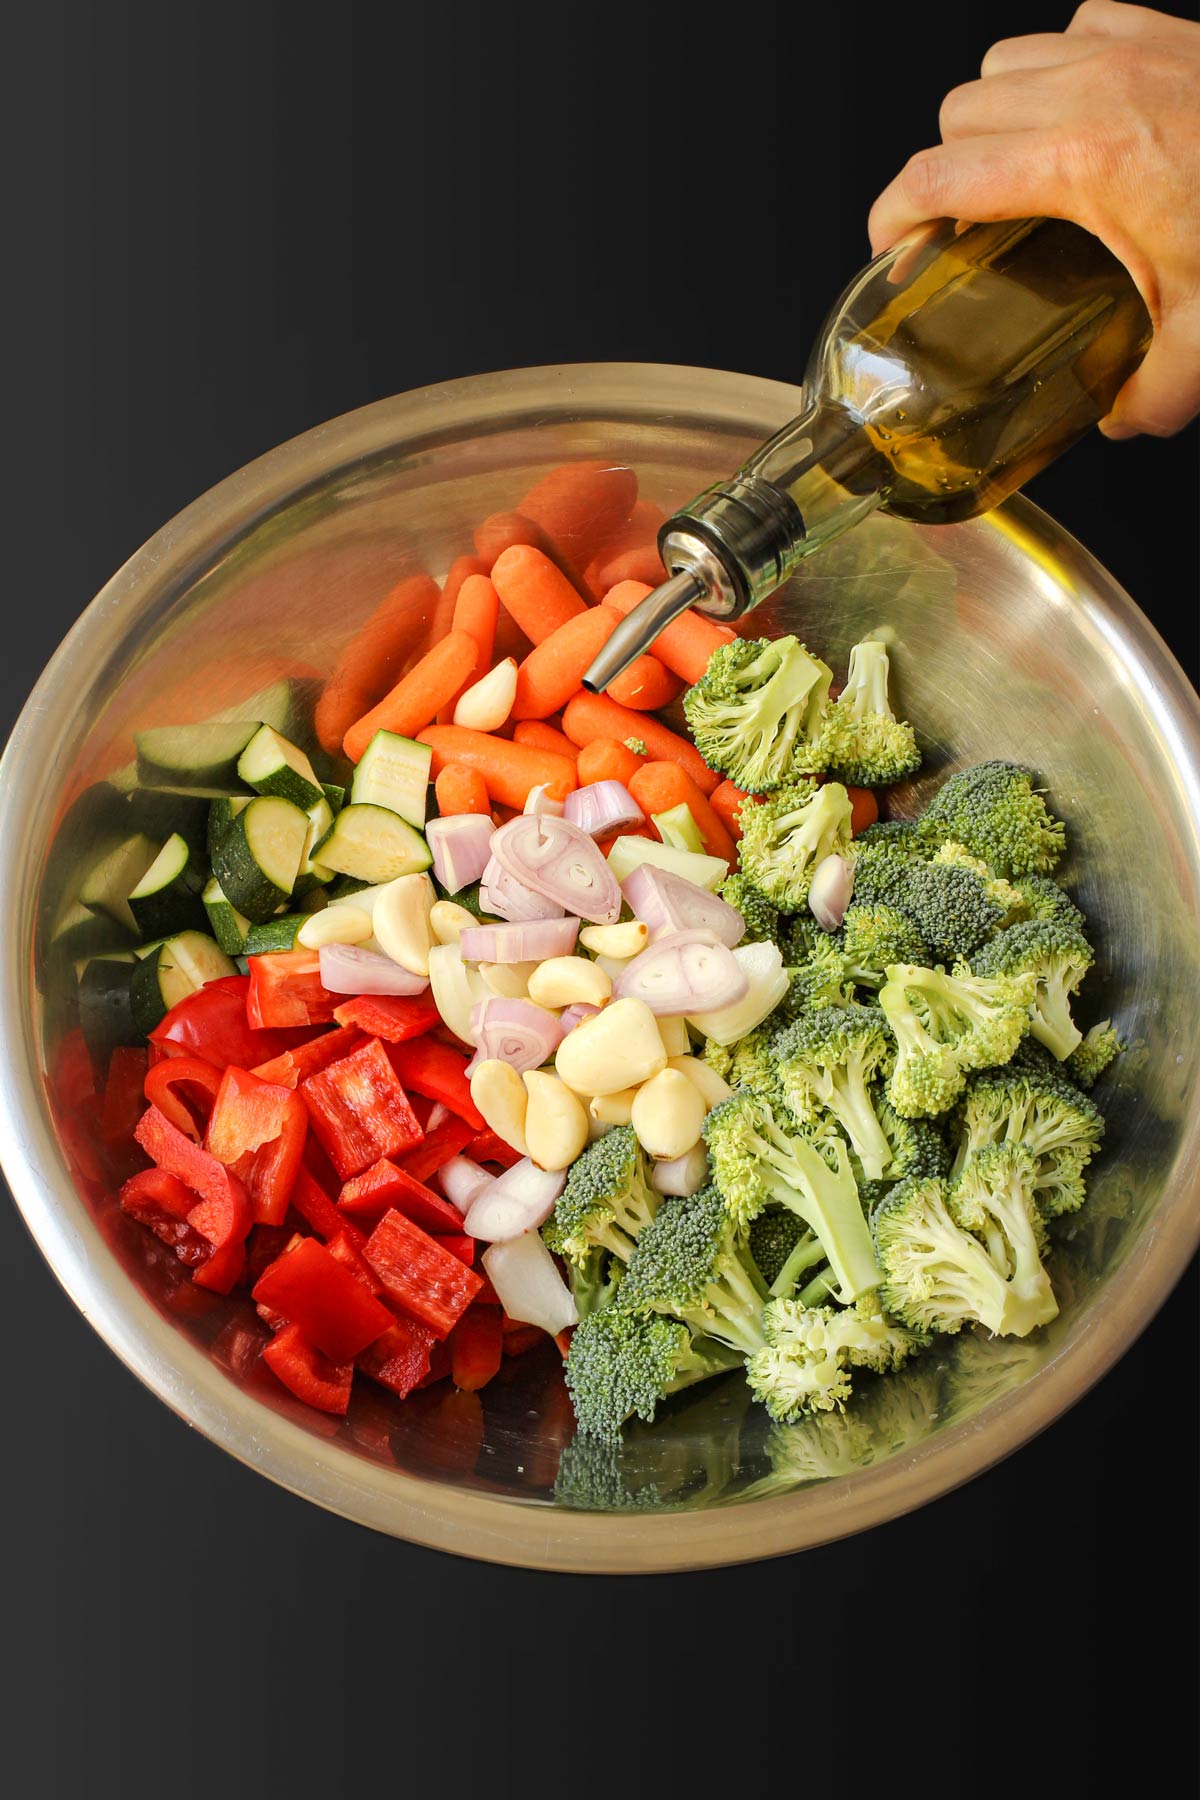 pouring oil on vegetables in bowl.